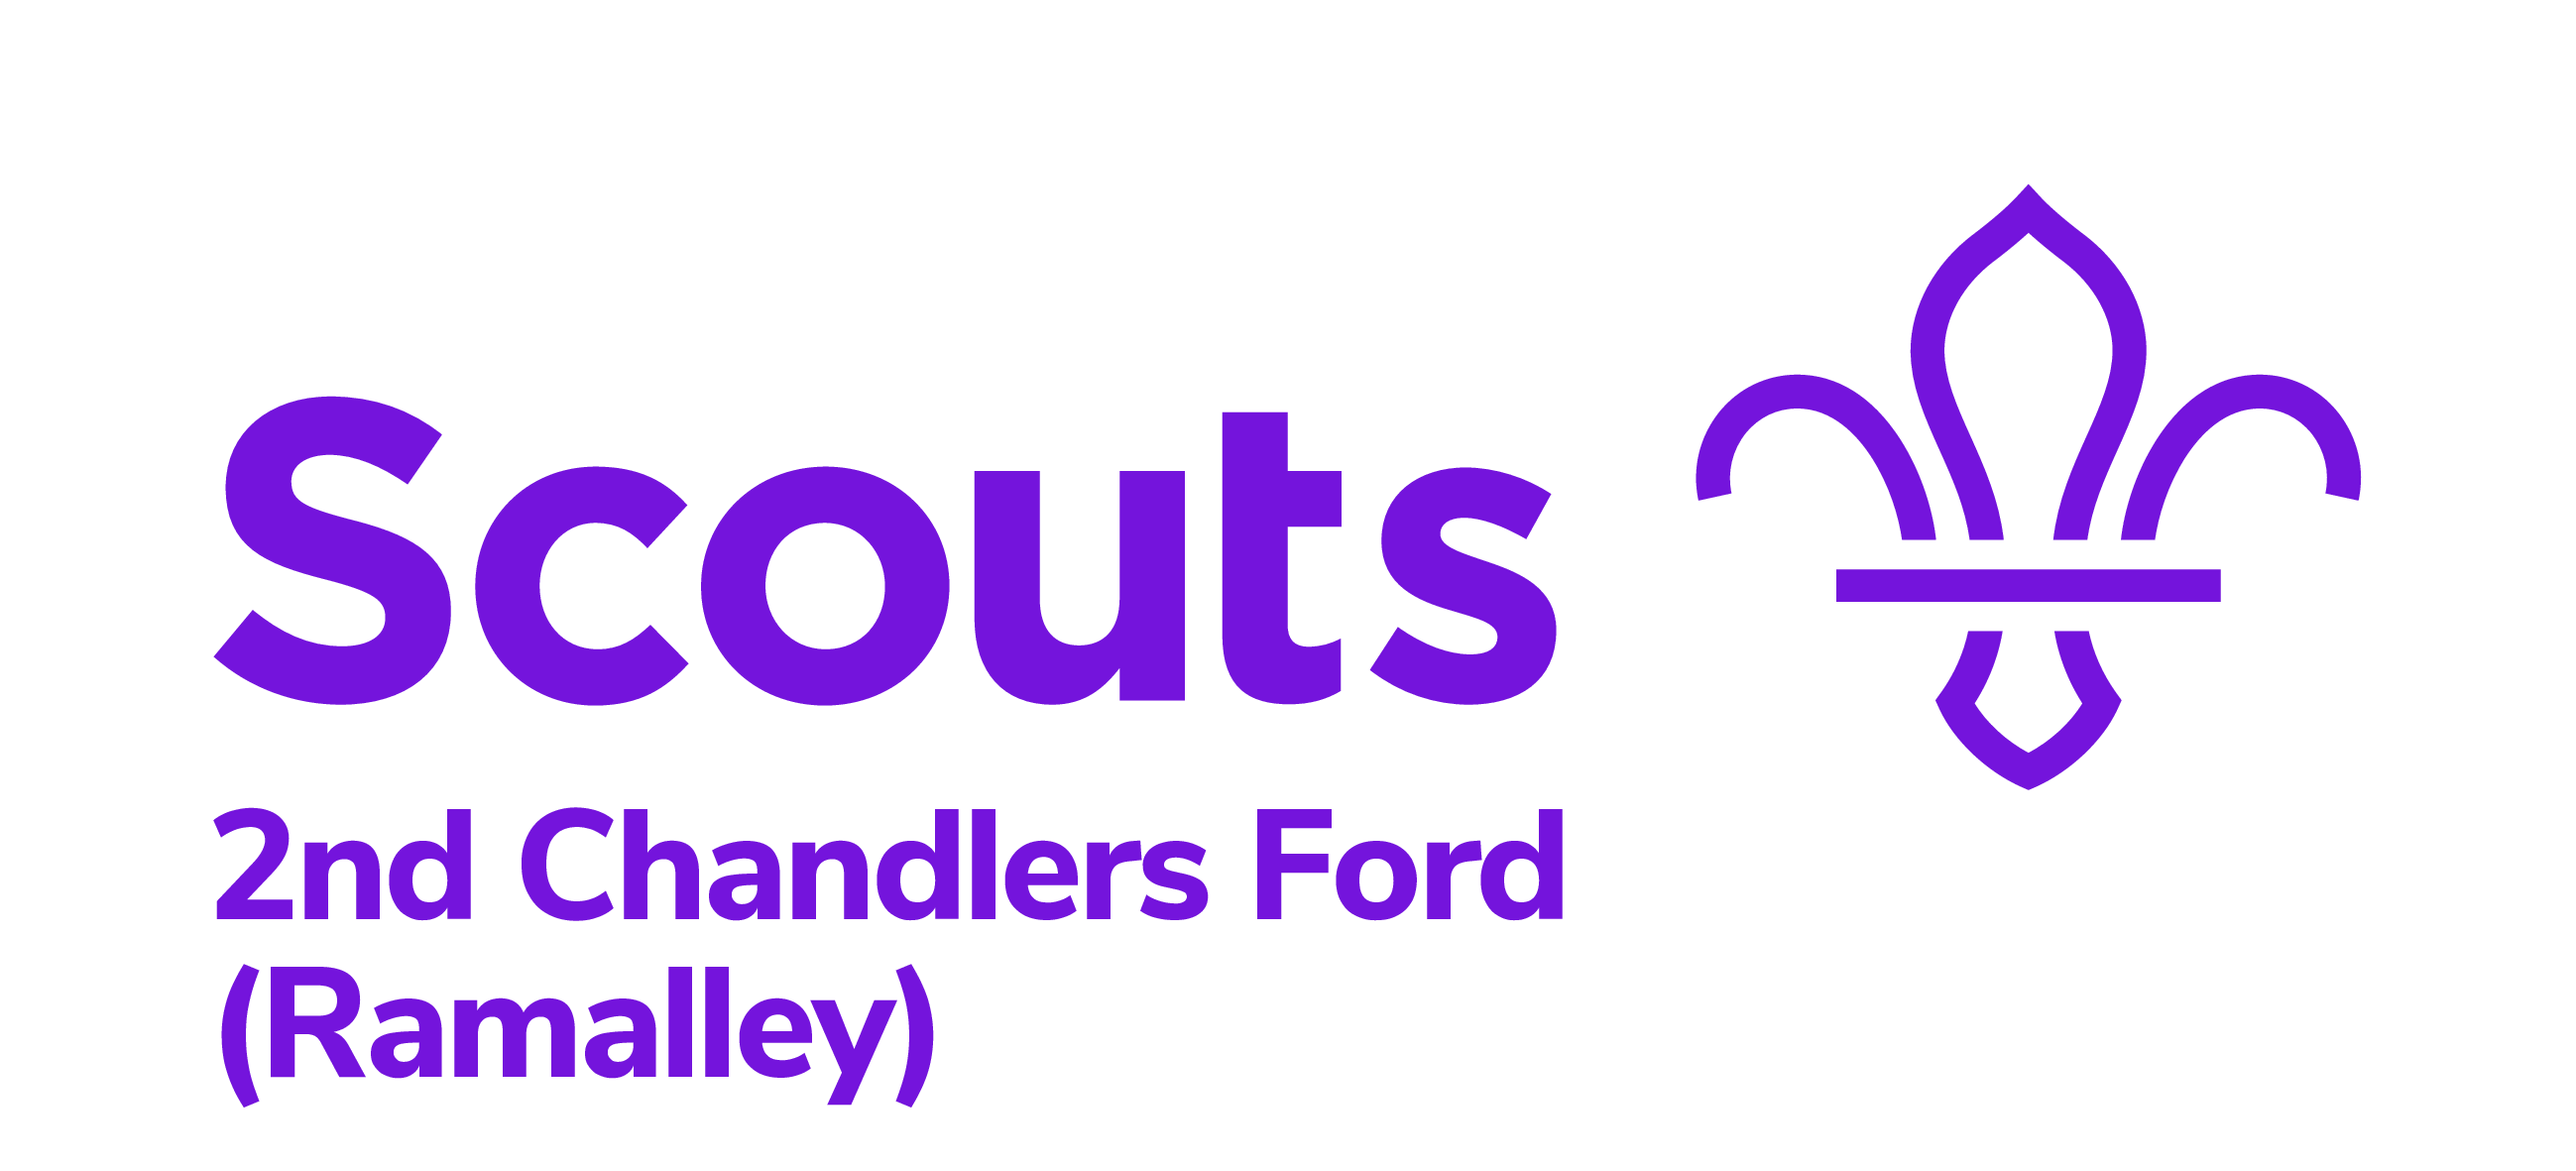 2nd Chandlers Ford Scouts